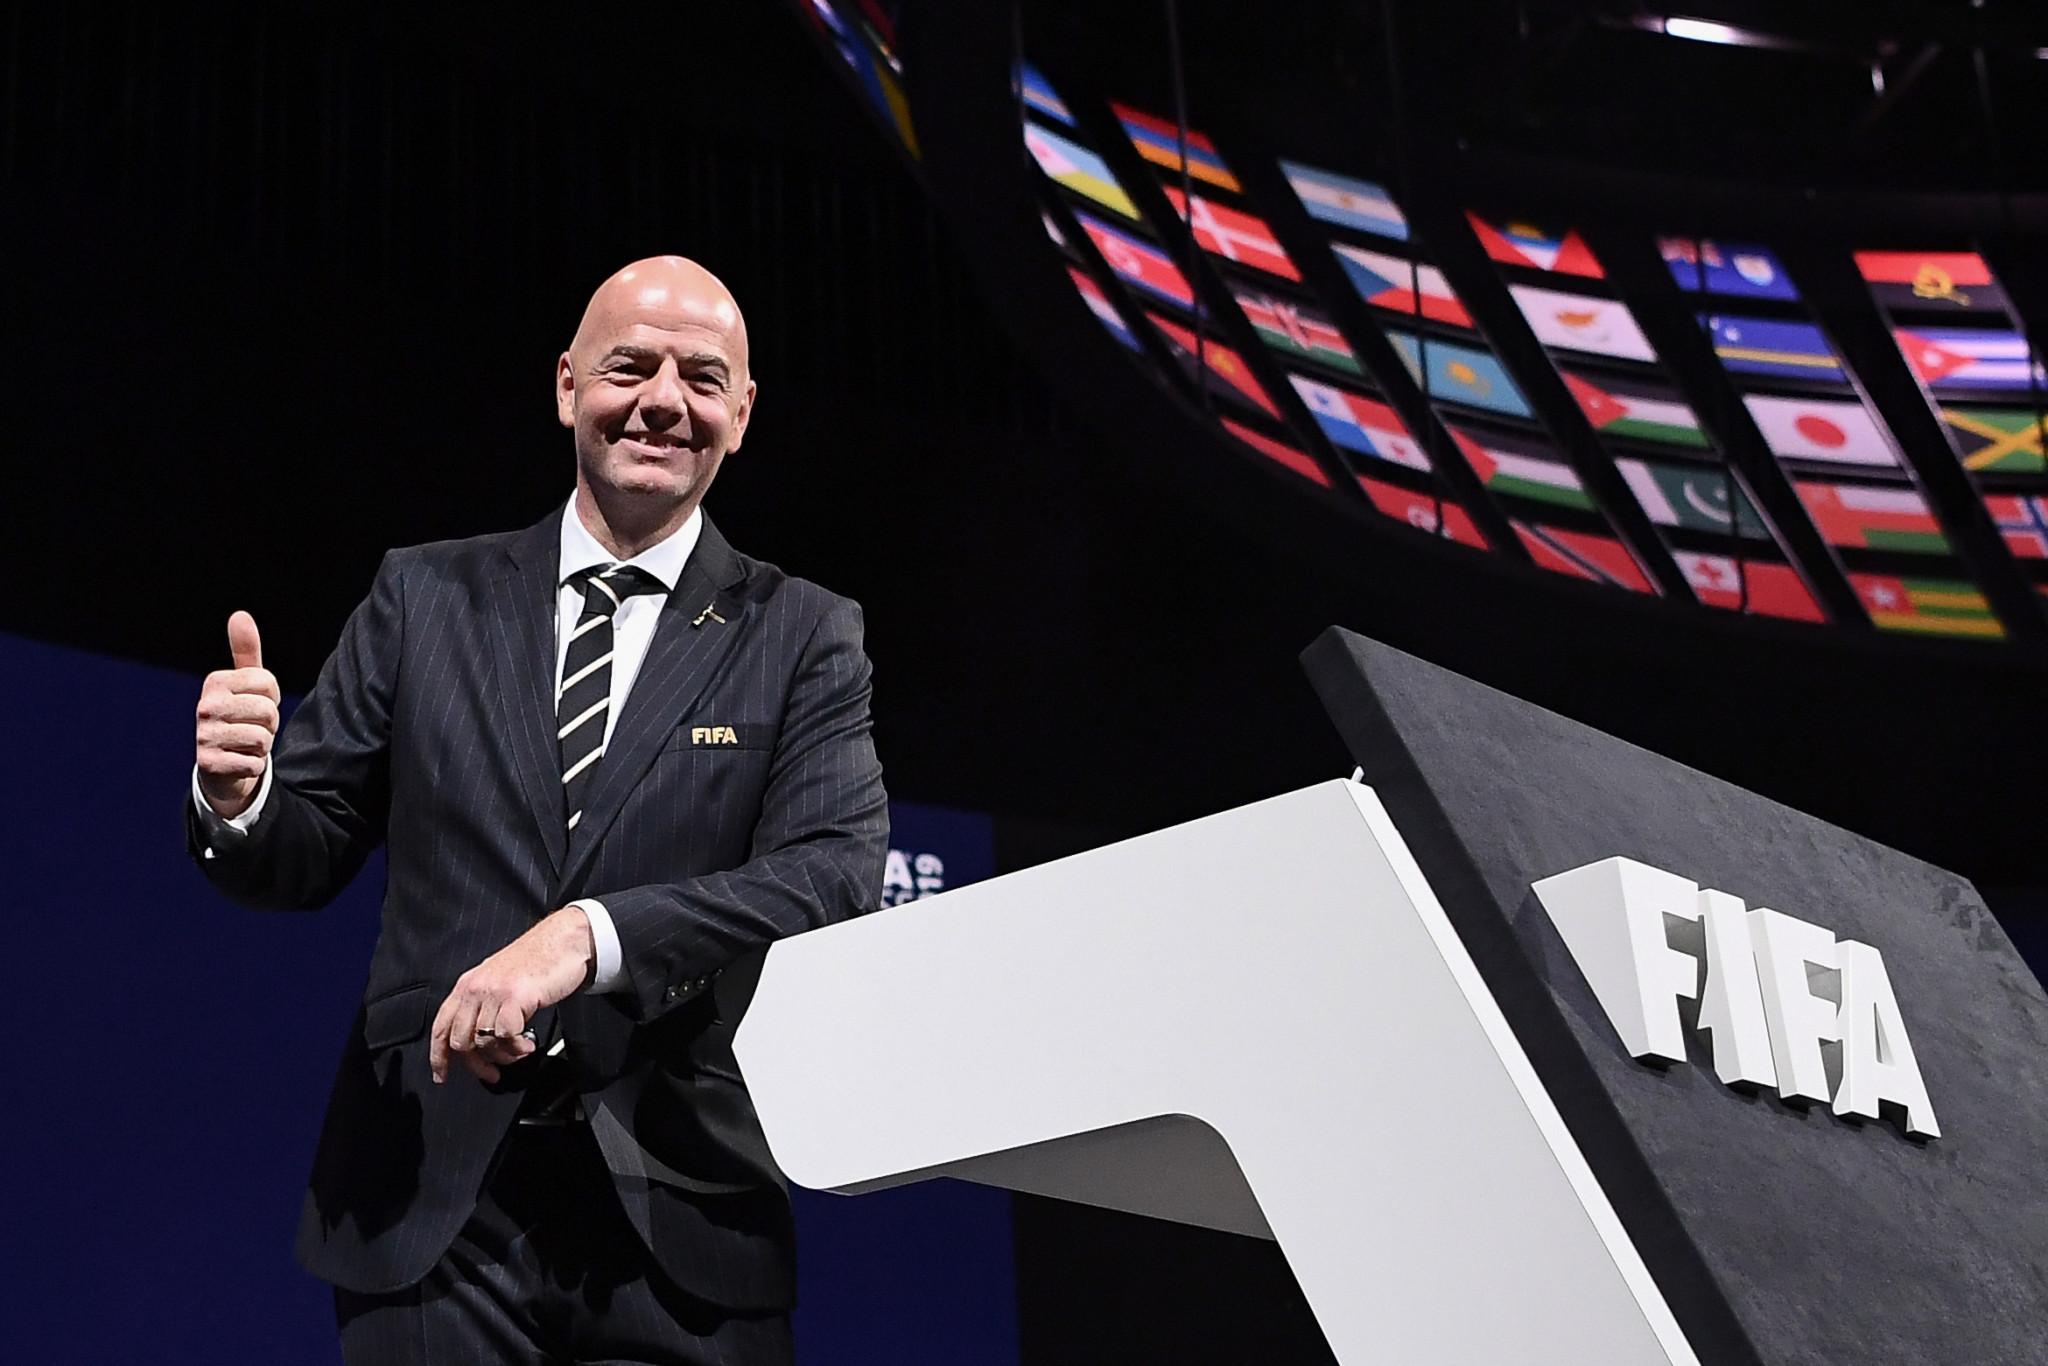 FIFA President Gianni Infantino suggested a Chinese bid for the 2030 World Cup was possible ©Getty Images